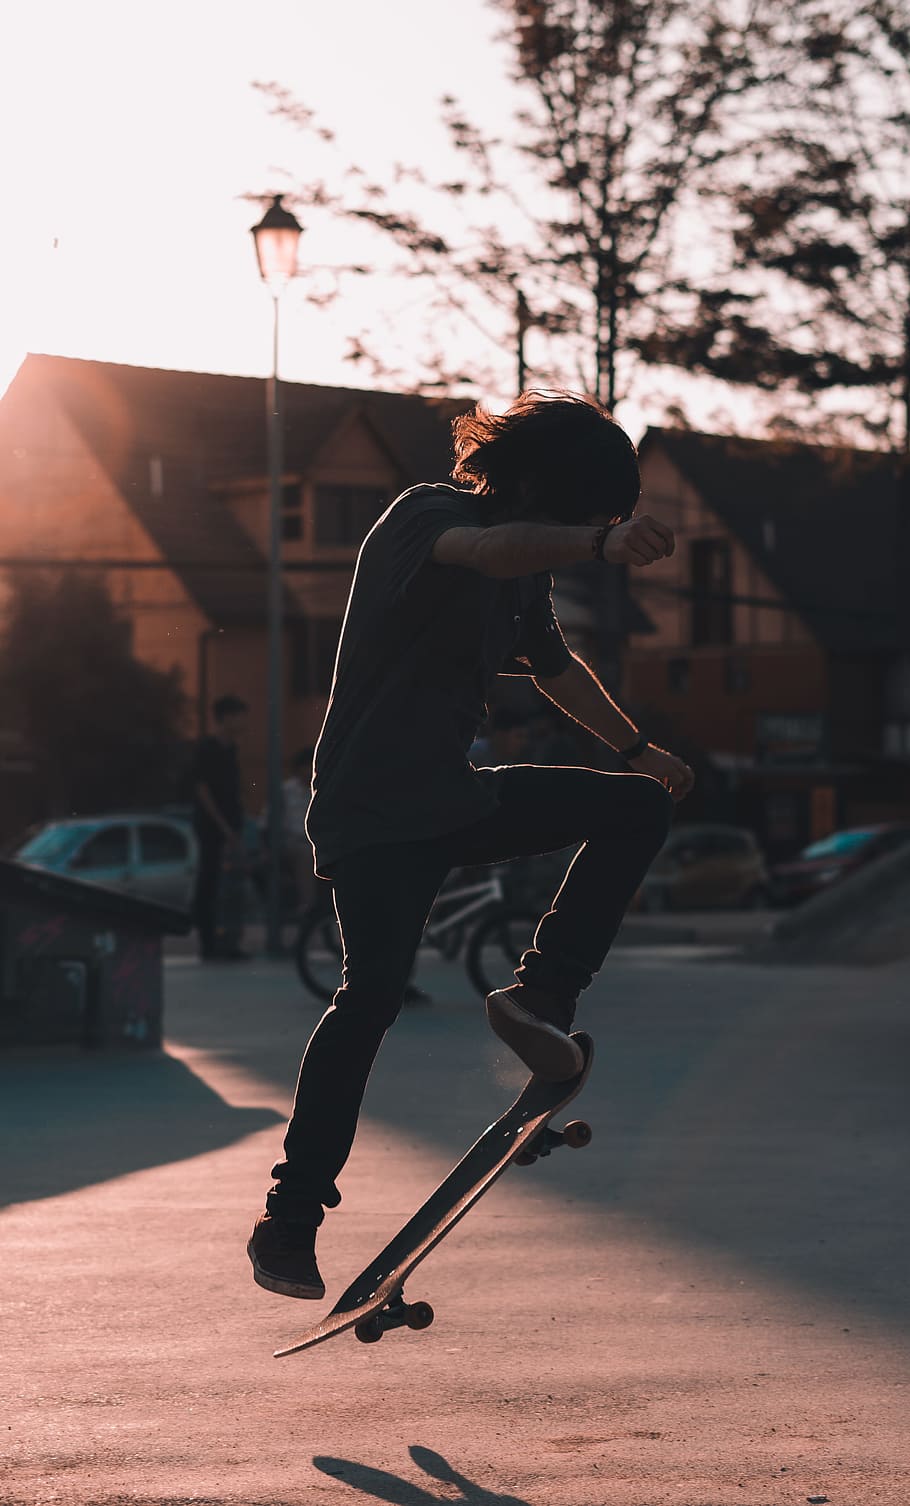 Aesthetic Skateboard Pictures Wallpapers - Wallpaper Cave